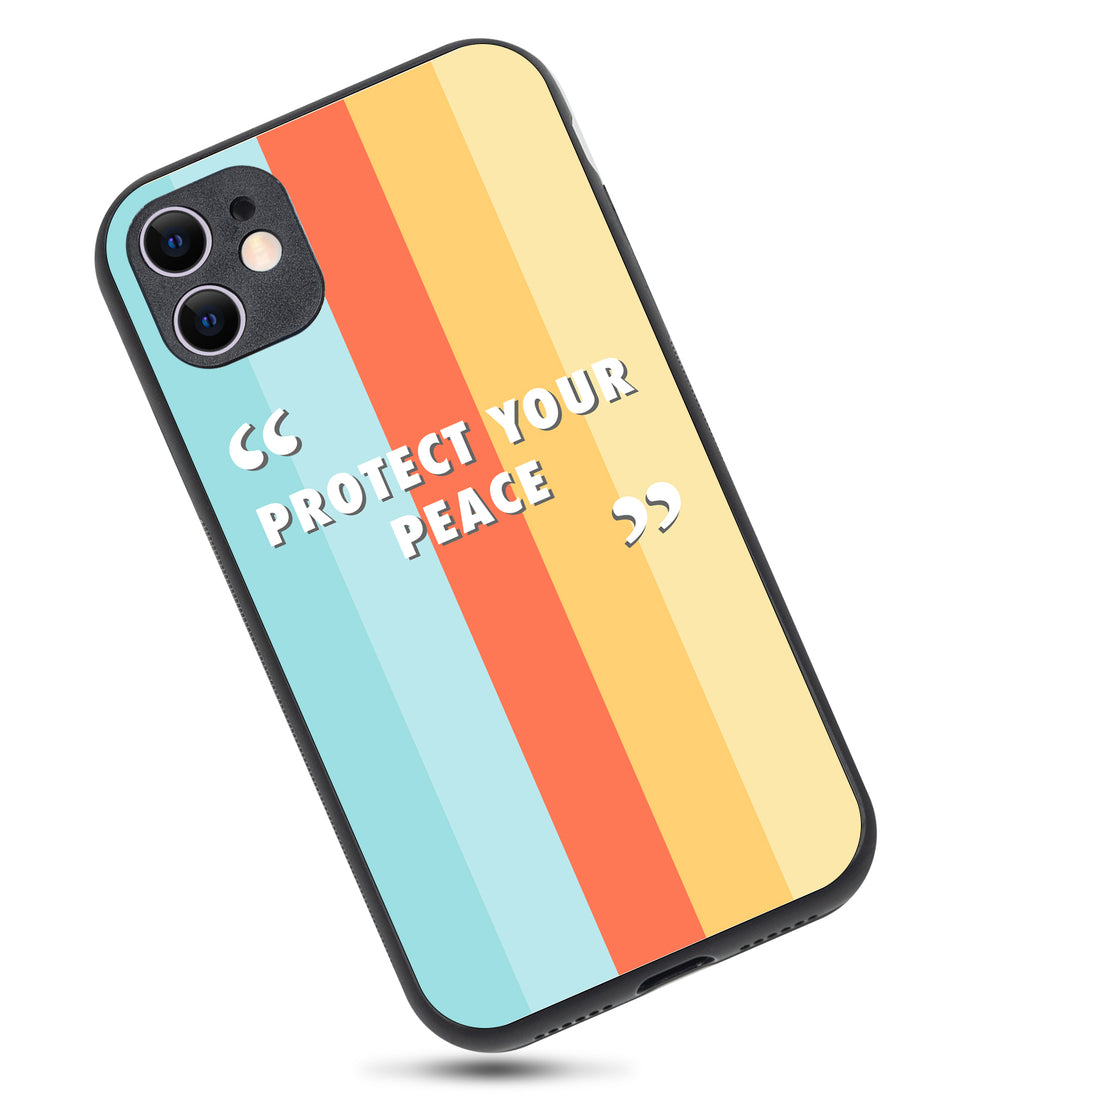 Protect your peace Motivational Quotes iPhone 11 Case